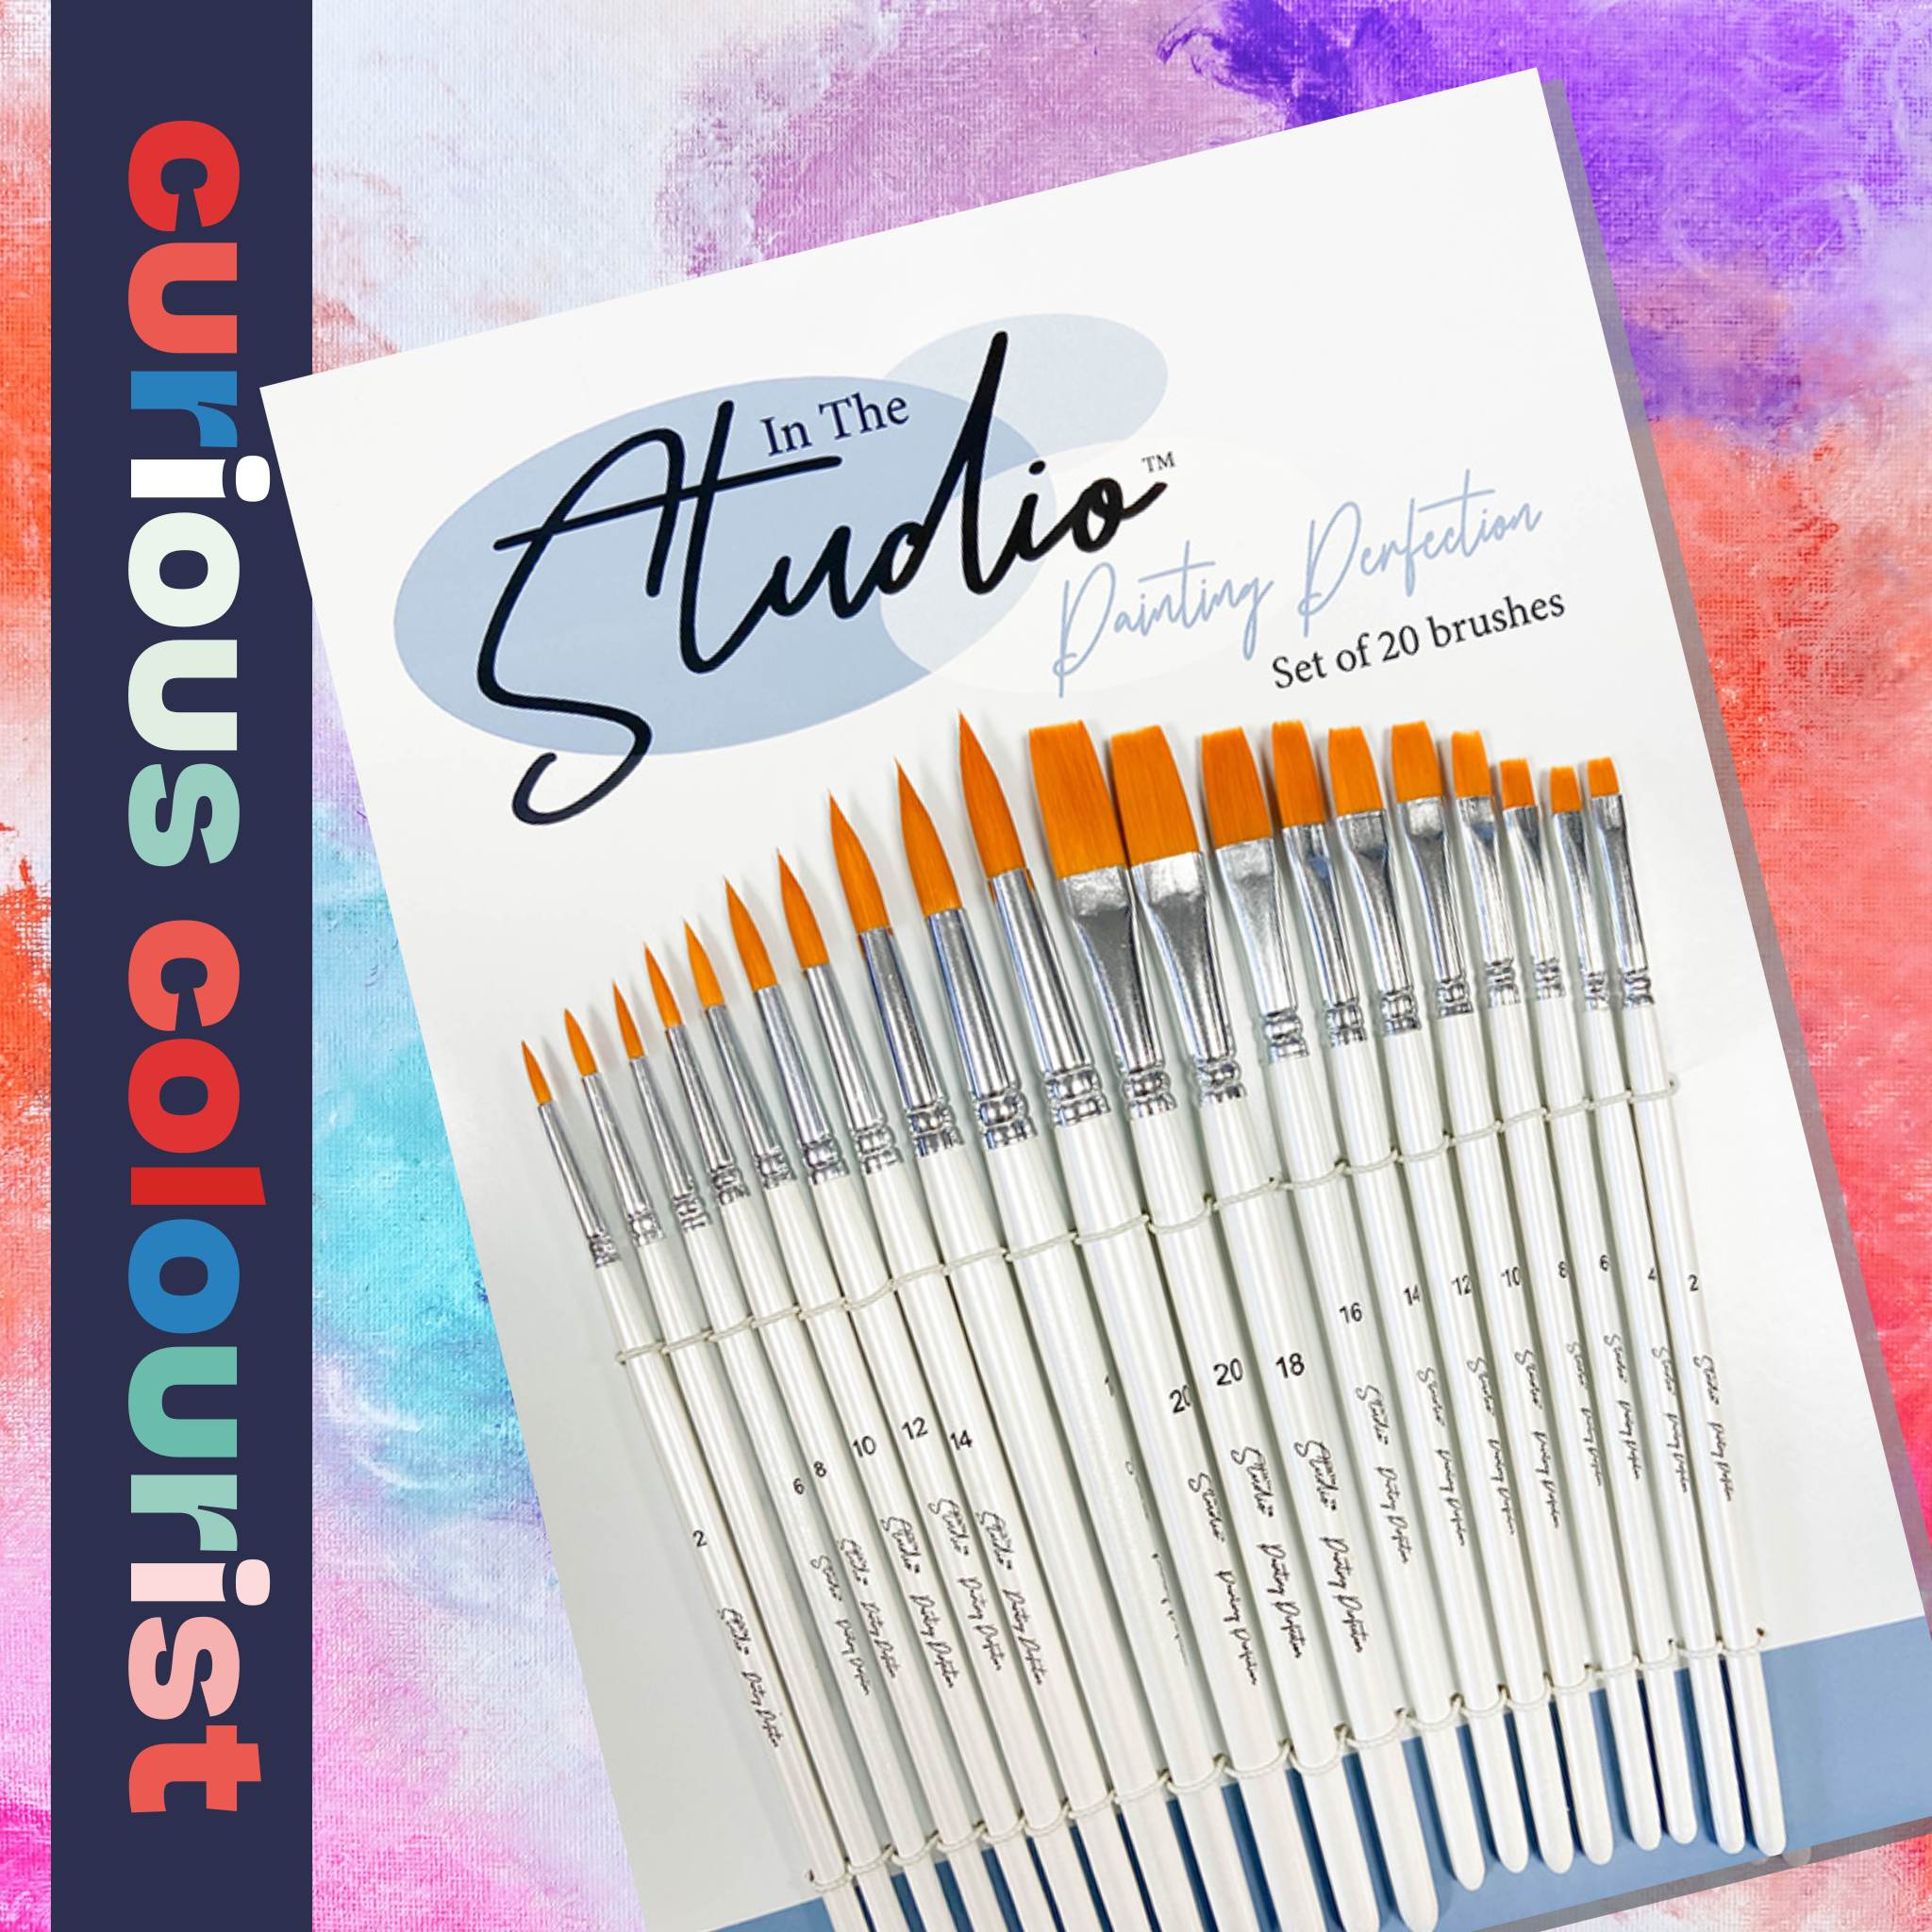 This set of 20 brushes includes 10 flat head brushes and 10 round head brushes to give a broad range of painting options for your leathercraft projects